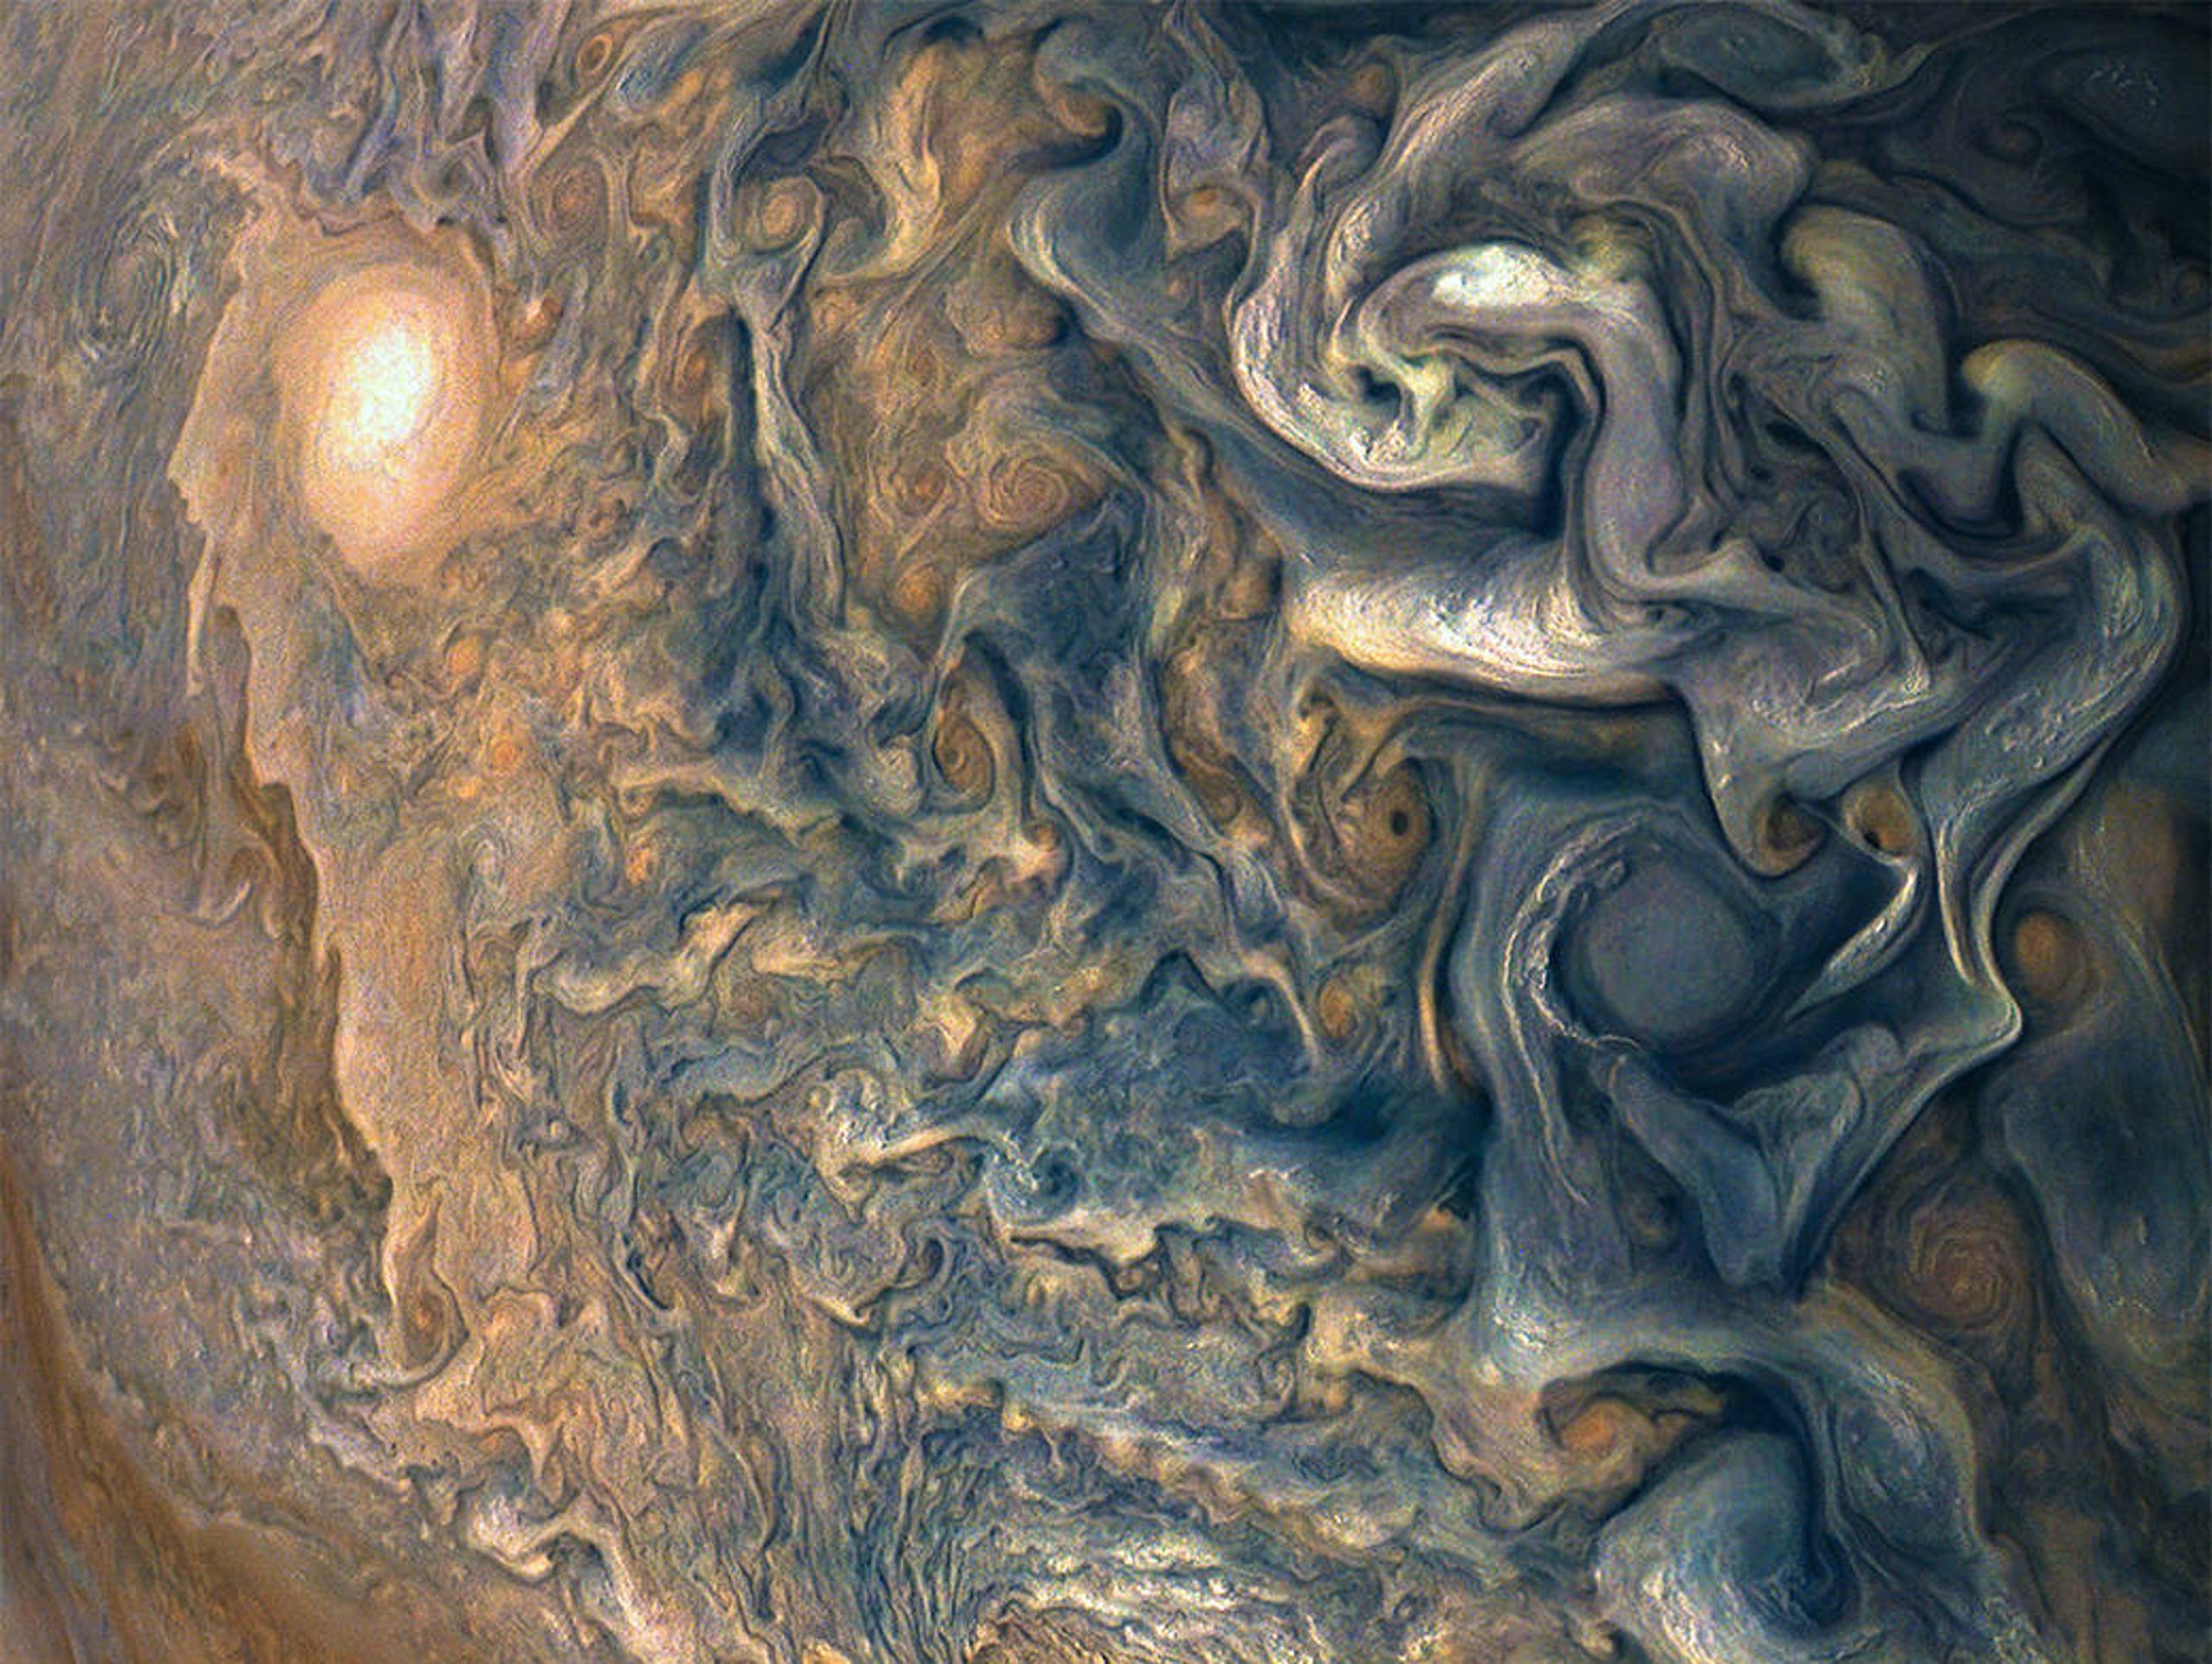 The Juno spacecraft captured this image of clouds above Jupiter on Dec. 16, 2017.